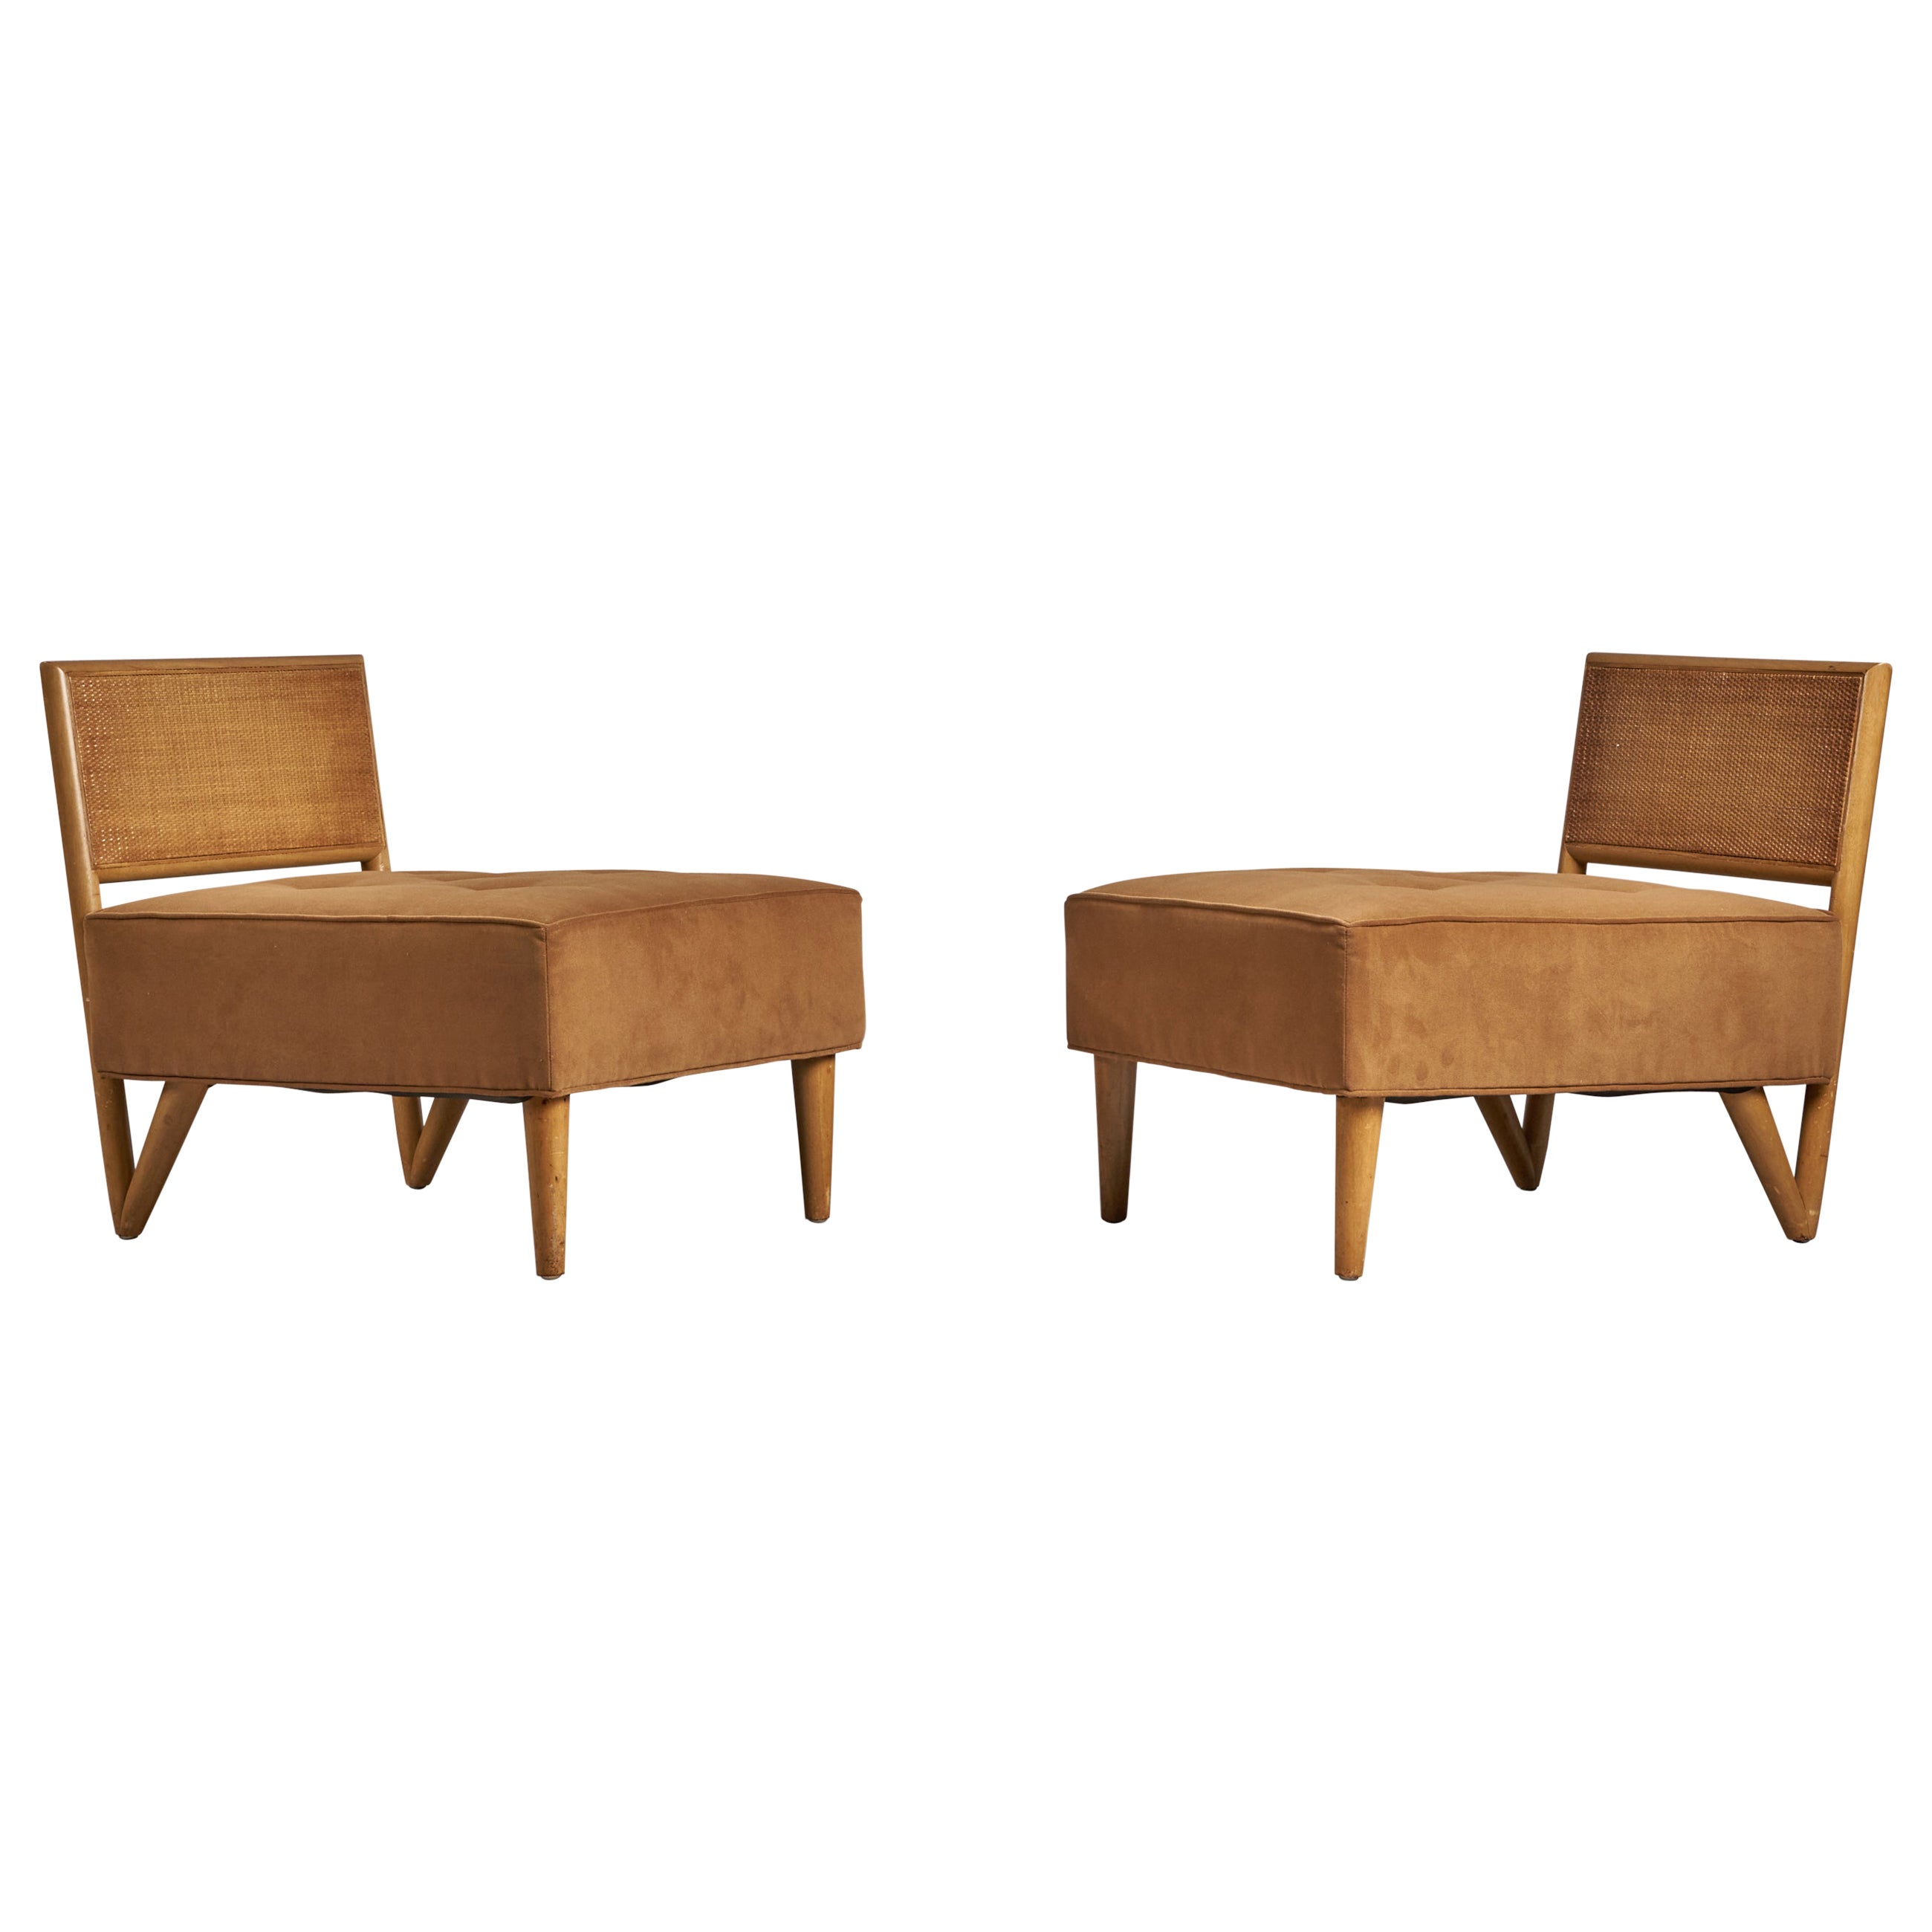 American Designer, Slipper Chairs, Wood, Rattan, Fabric, USA, 1940s For Sale